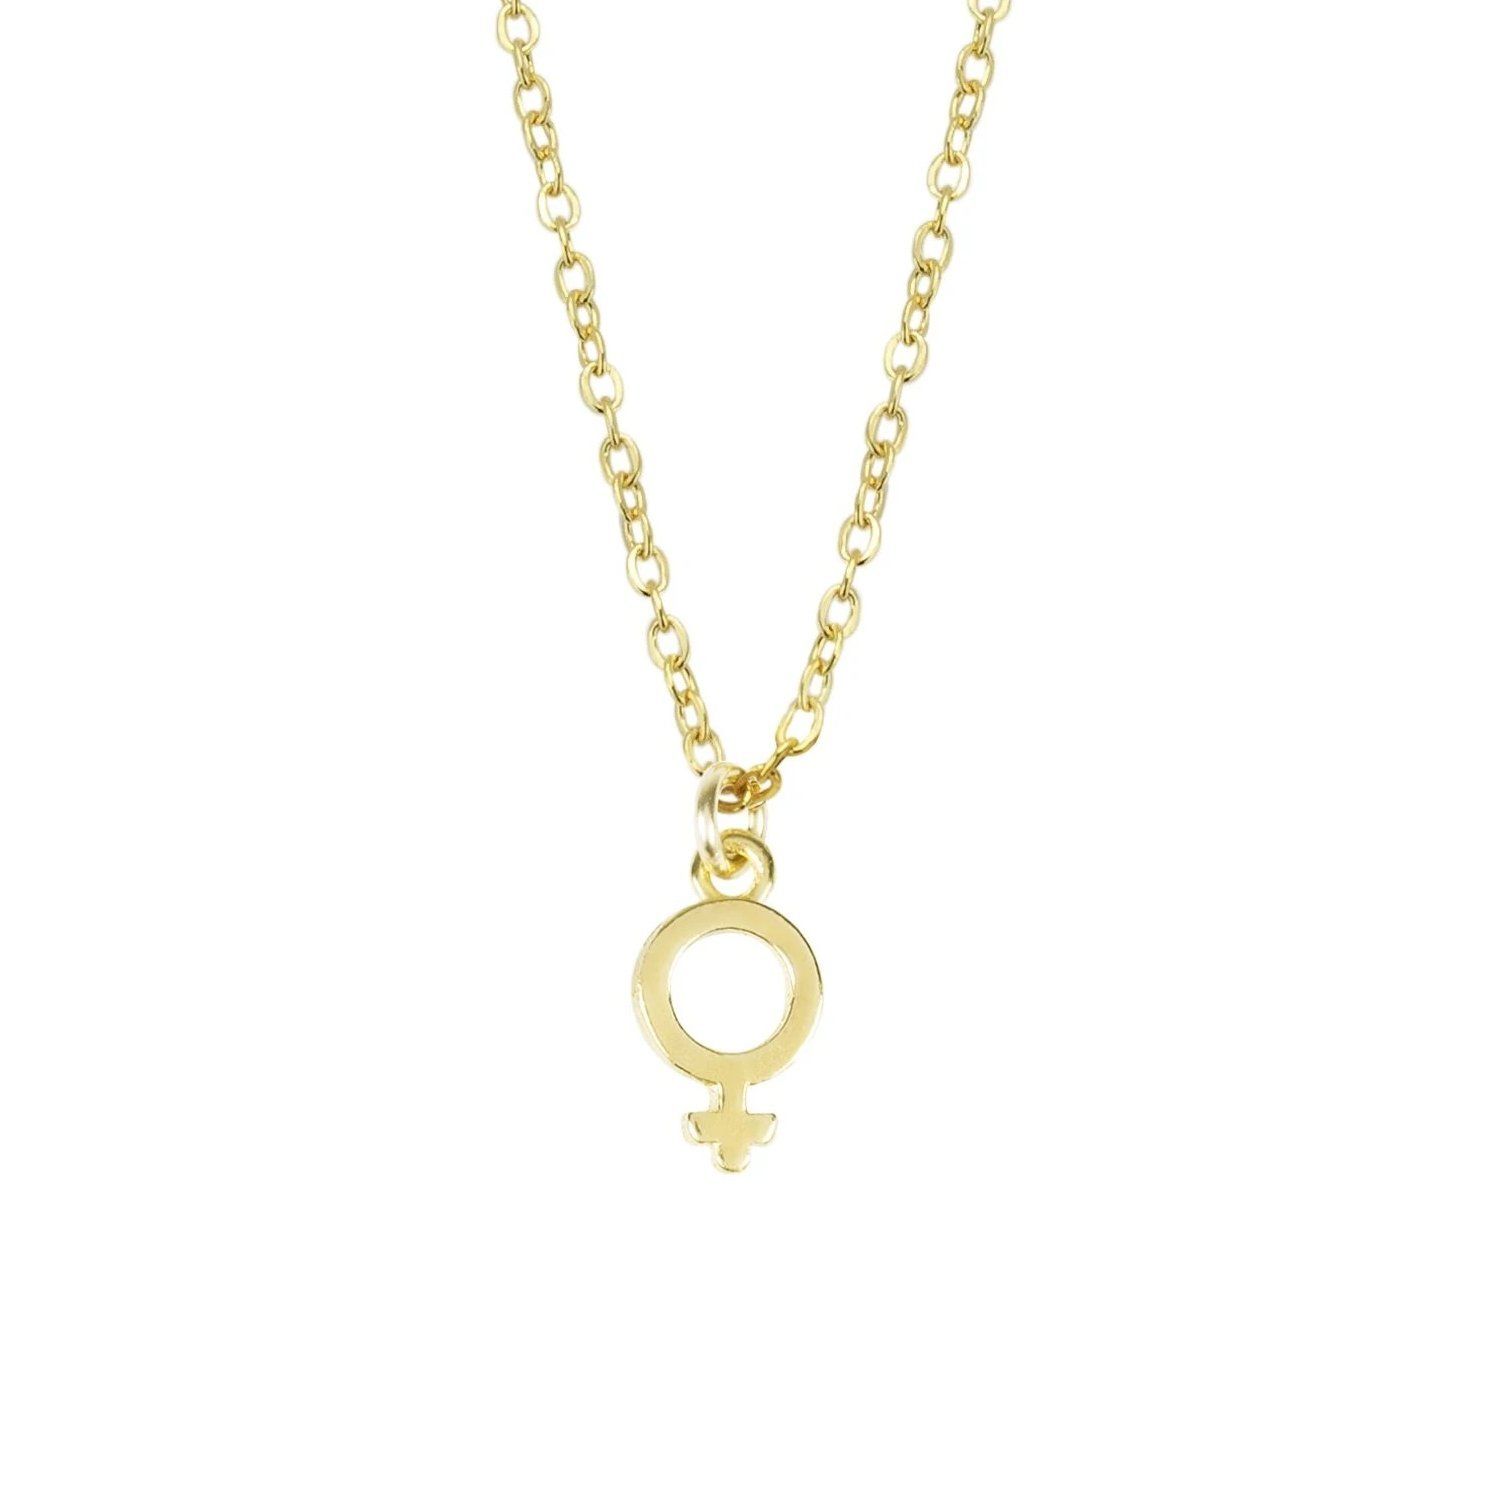 Wear it loud and proud! The Female Symbol Necklace was inspired by all the support and help that Katie has received from the leading ladies in her life. When you wear this necklace, we hope you feel empowered and ready to be the lady boss that you are.  Handmade in California by Katie Dean Jewelry.